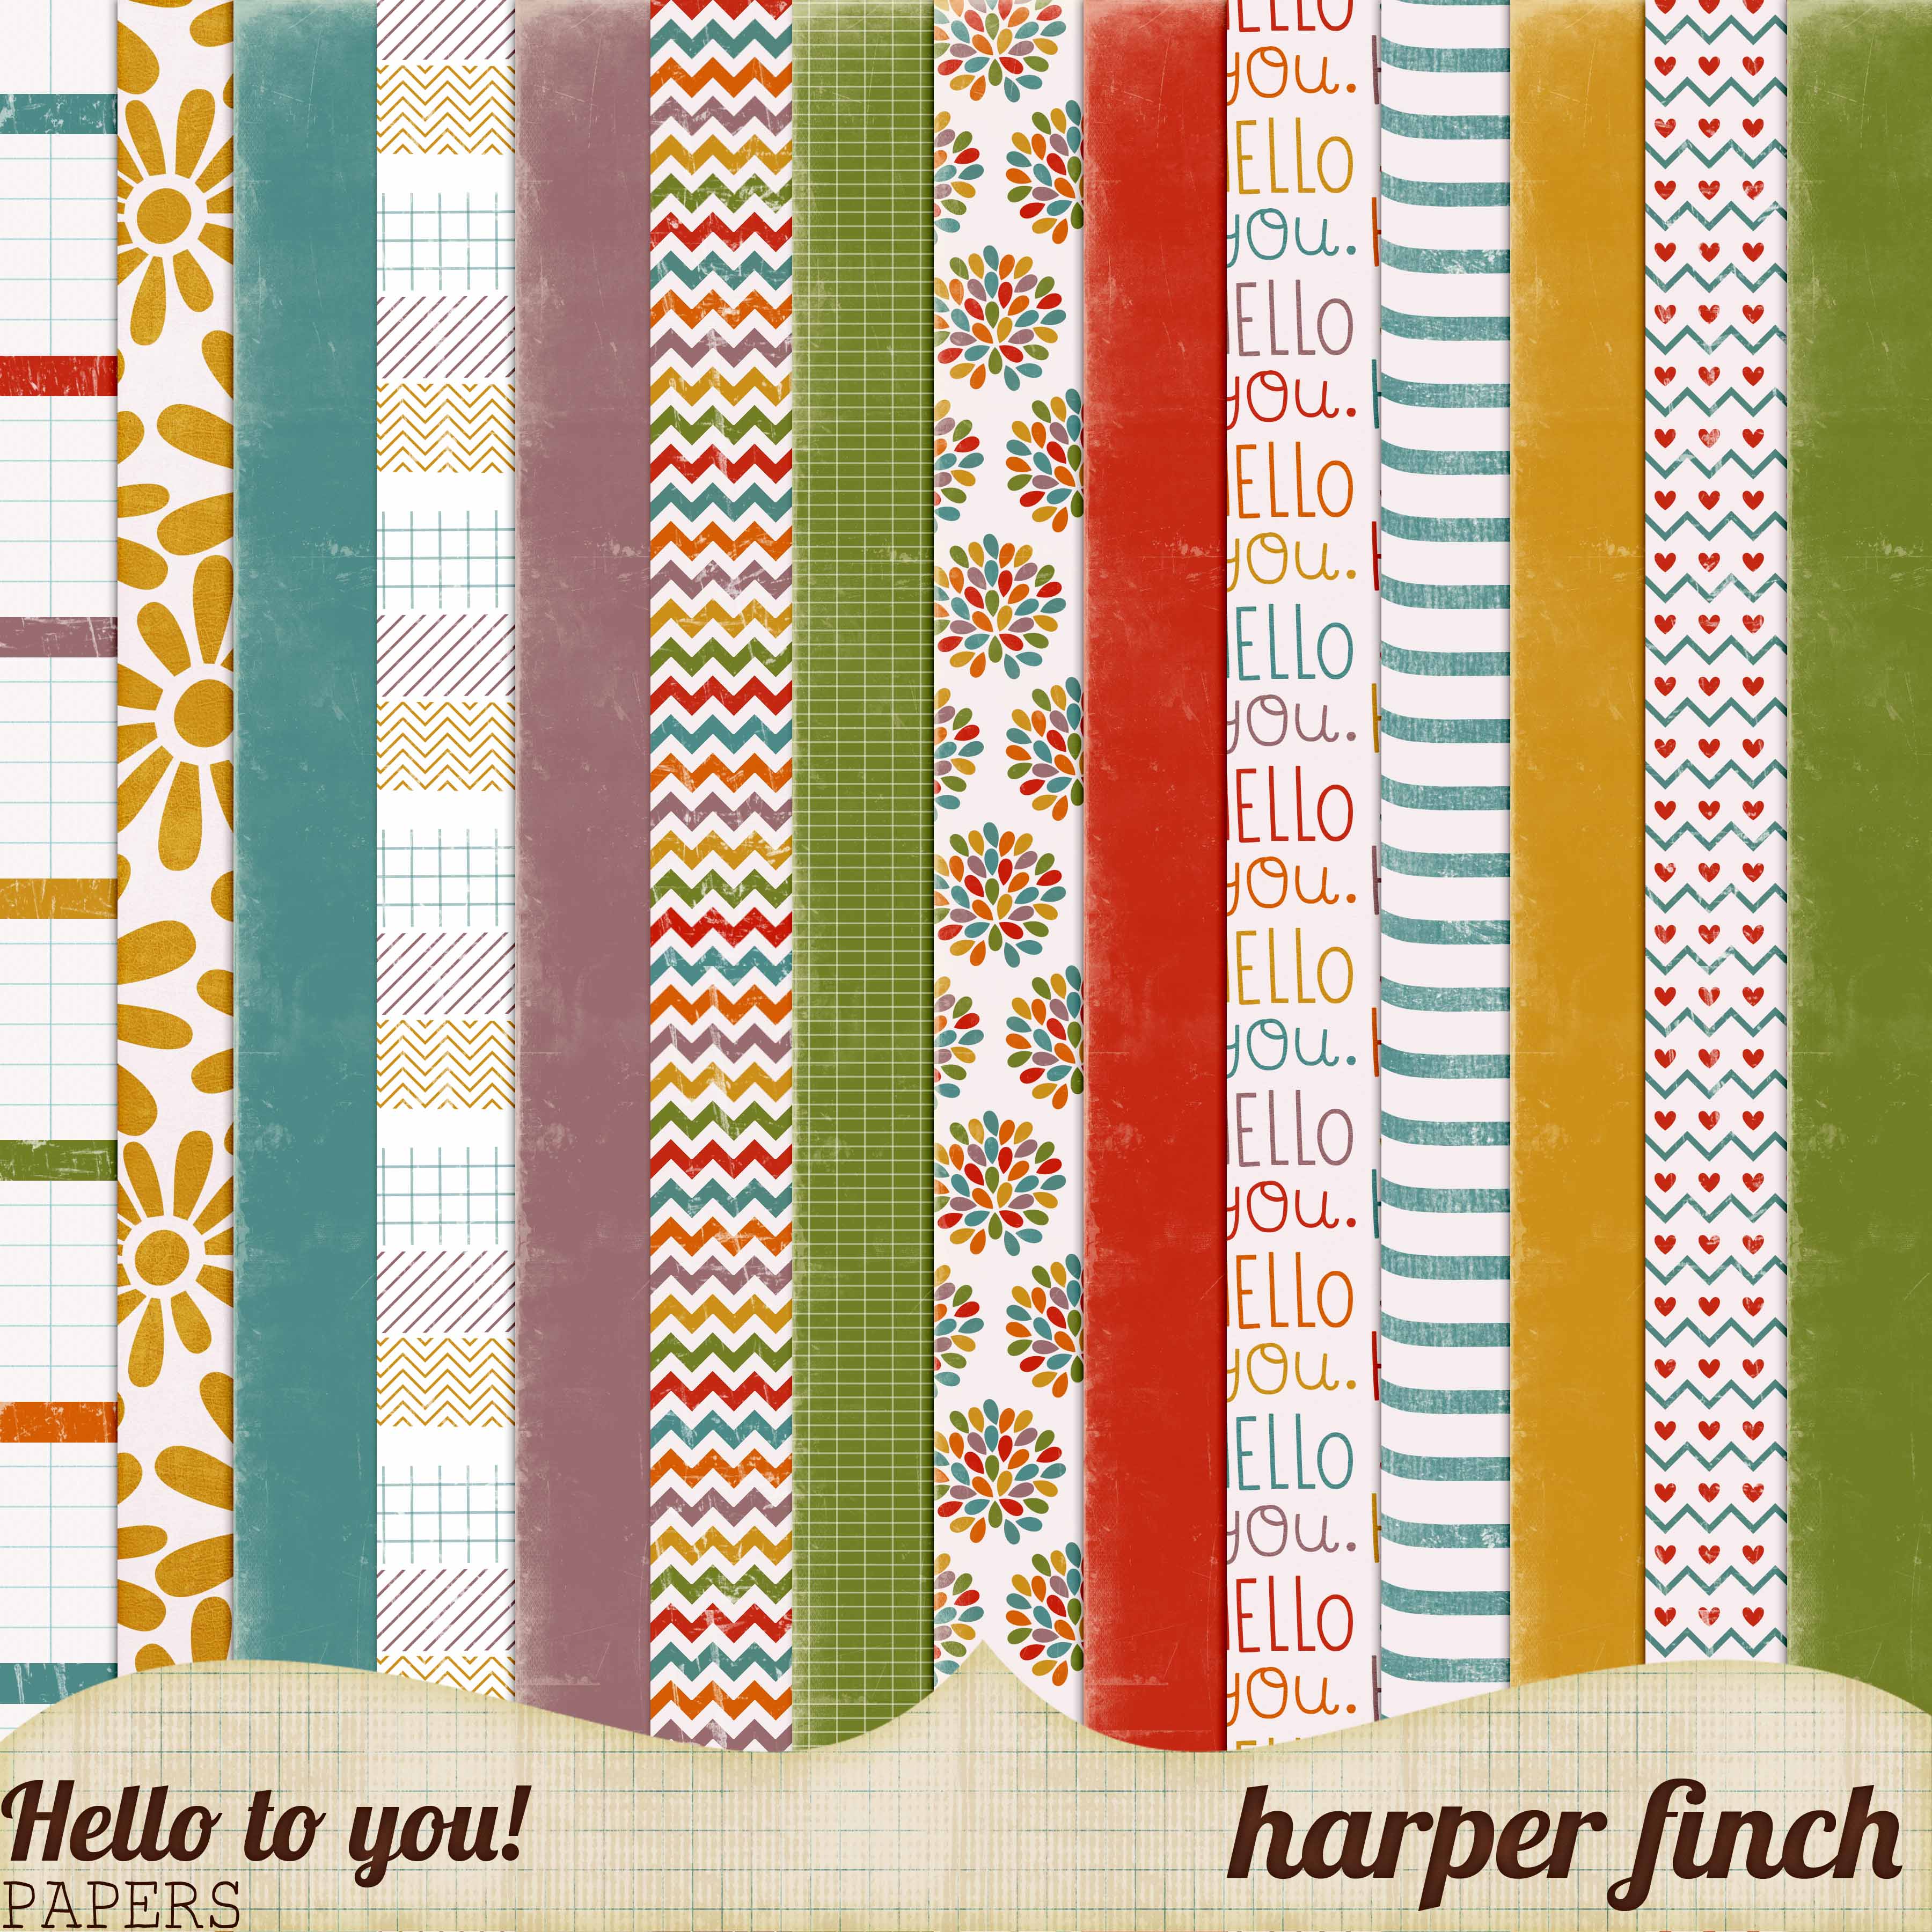 Hello to You!, Patterned and Solid Papers